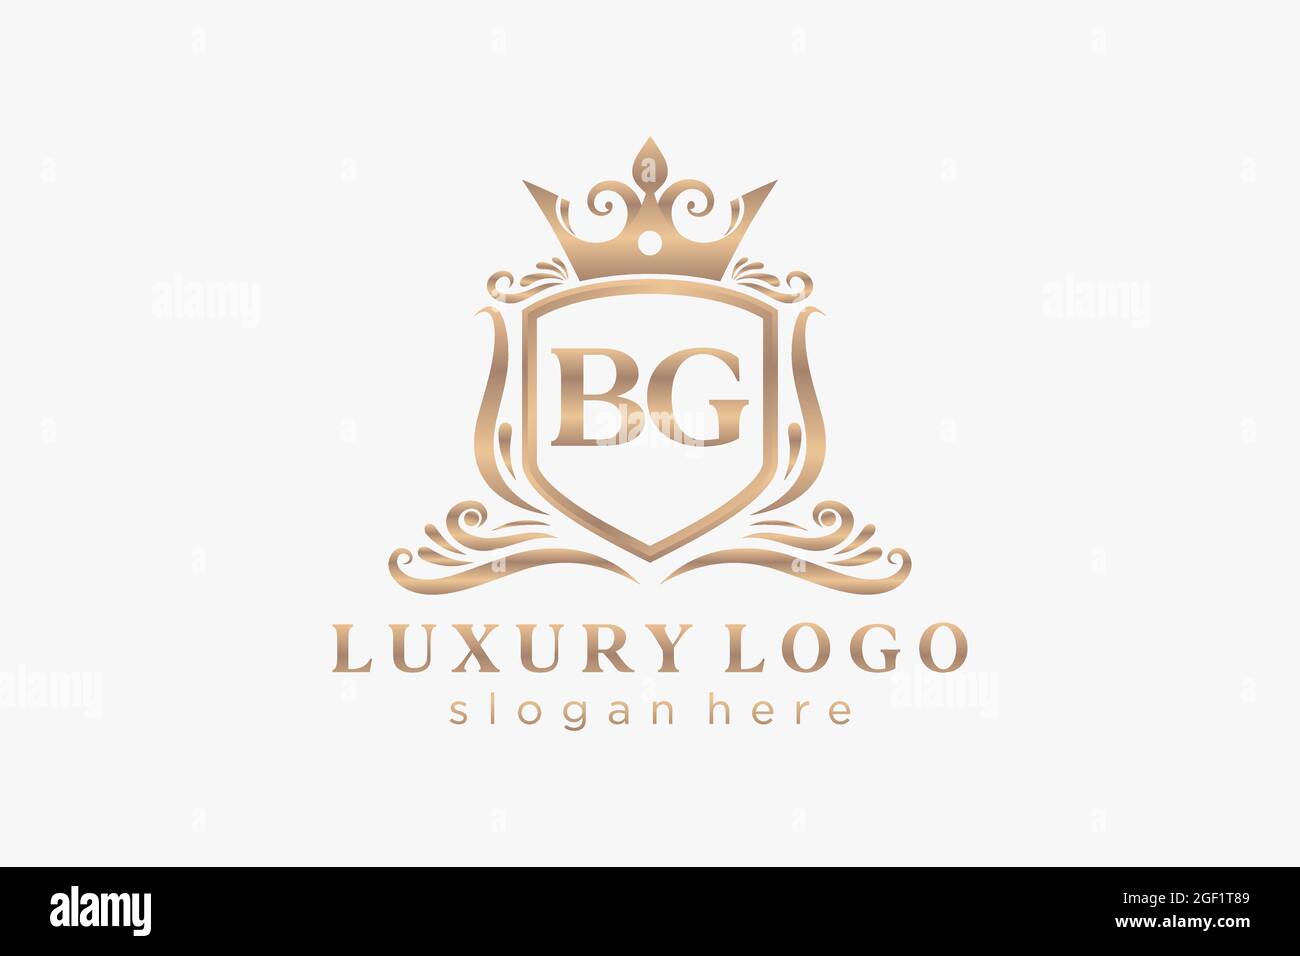 BG Letter Royal Luxury Logo template in vector art for Restaurant, Royalty, Boutique, Cafe, Hotel, Heraldic, Jewelry, Fashion and other vector illustr Stock Vector